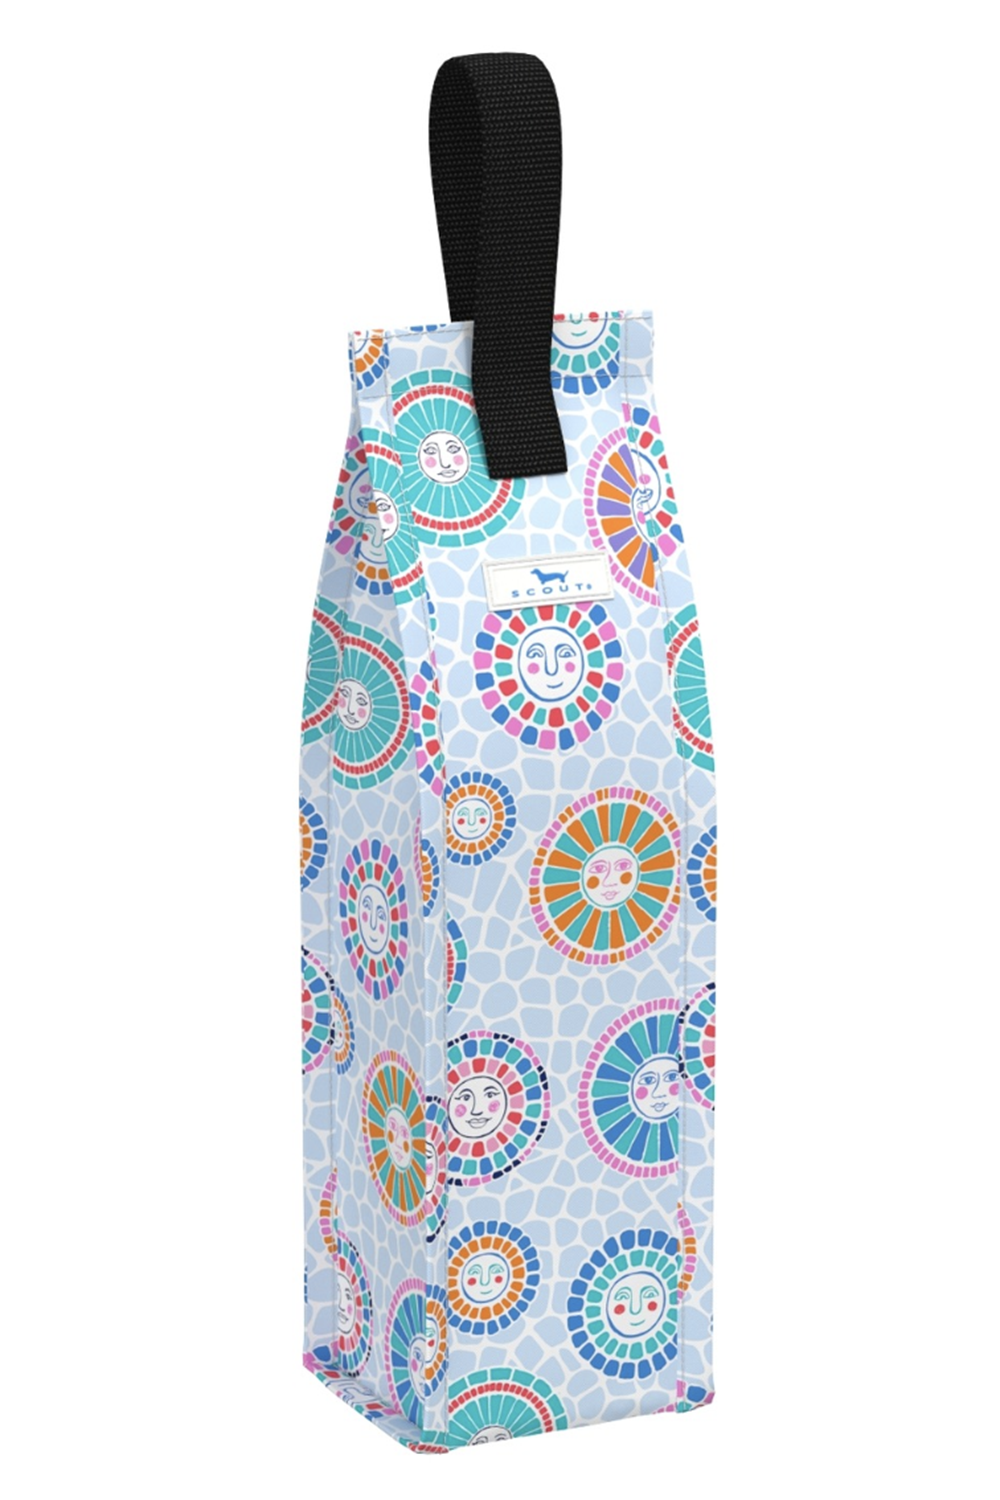 Spirit Chillah Insulated Wine Cooler Bag - "Sunny Side Up" SUM24